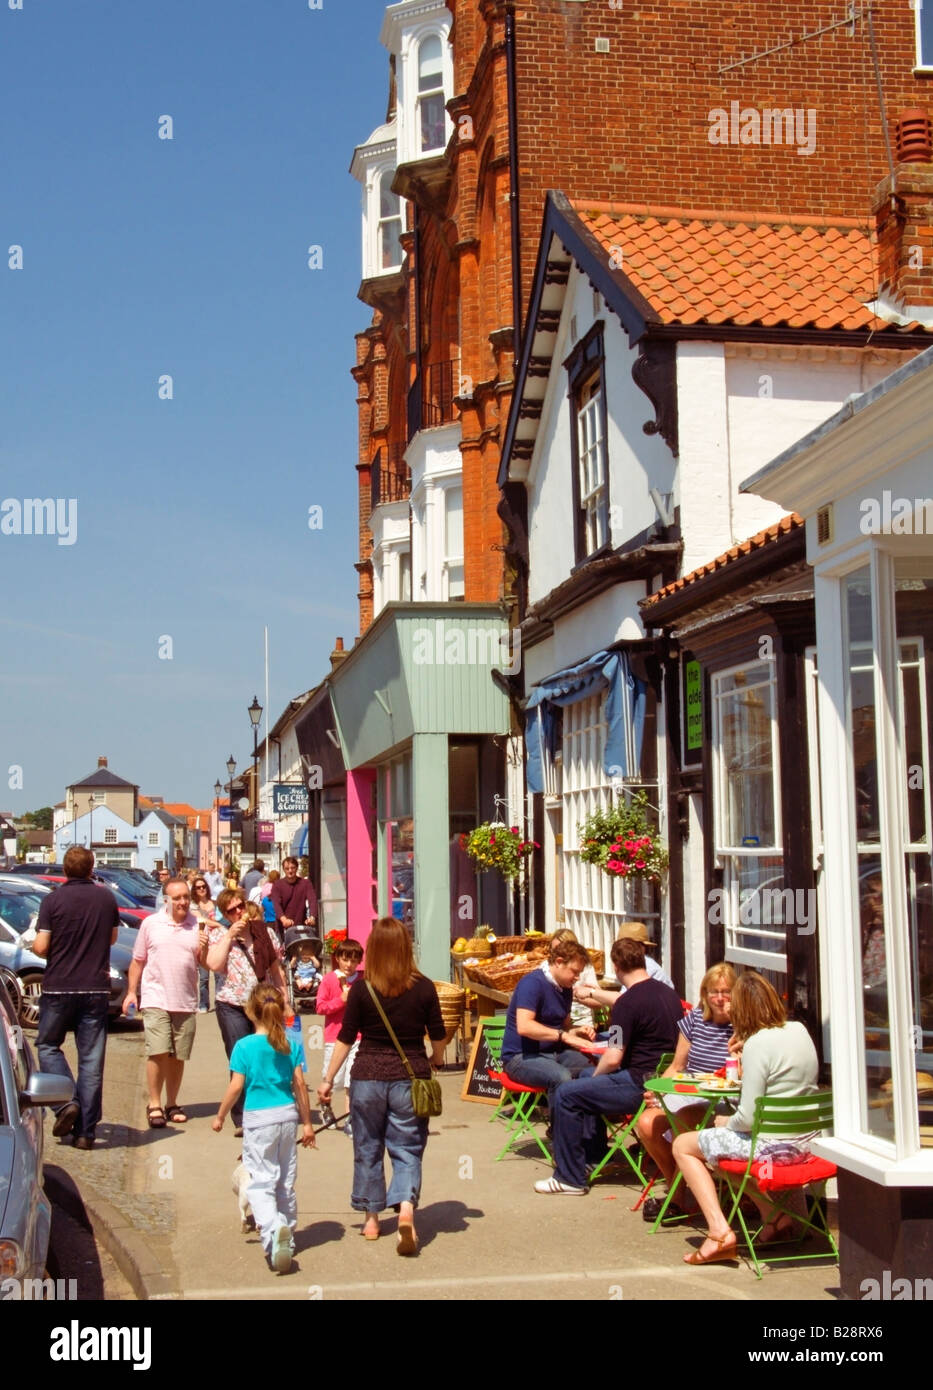 People sitting, drinking and dining in street café and restaurants while busy with tourists along the High Street, Aldeburgh, Suffolk, England, UK Stock Photo